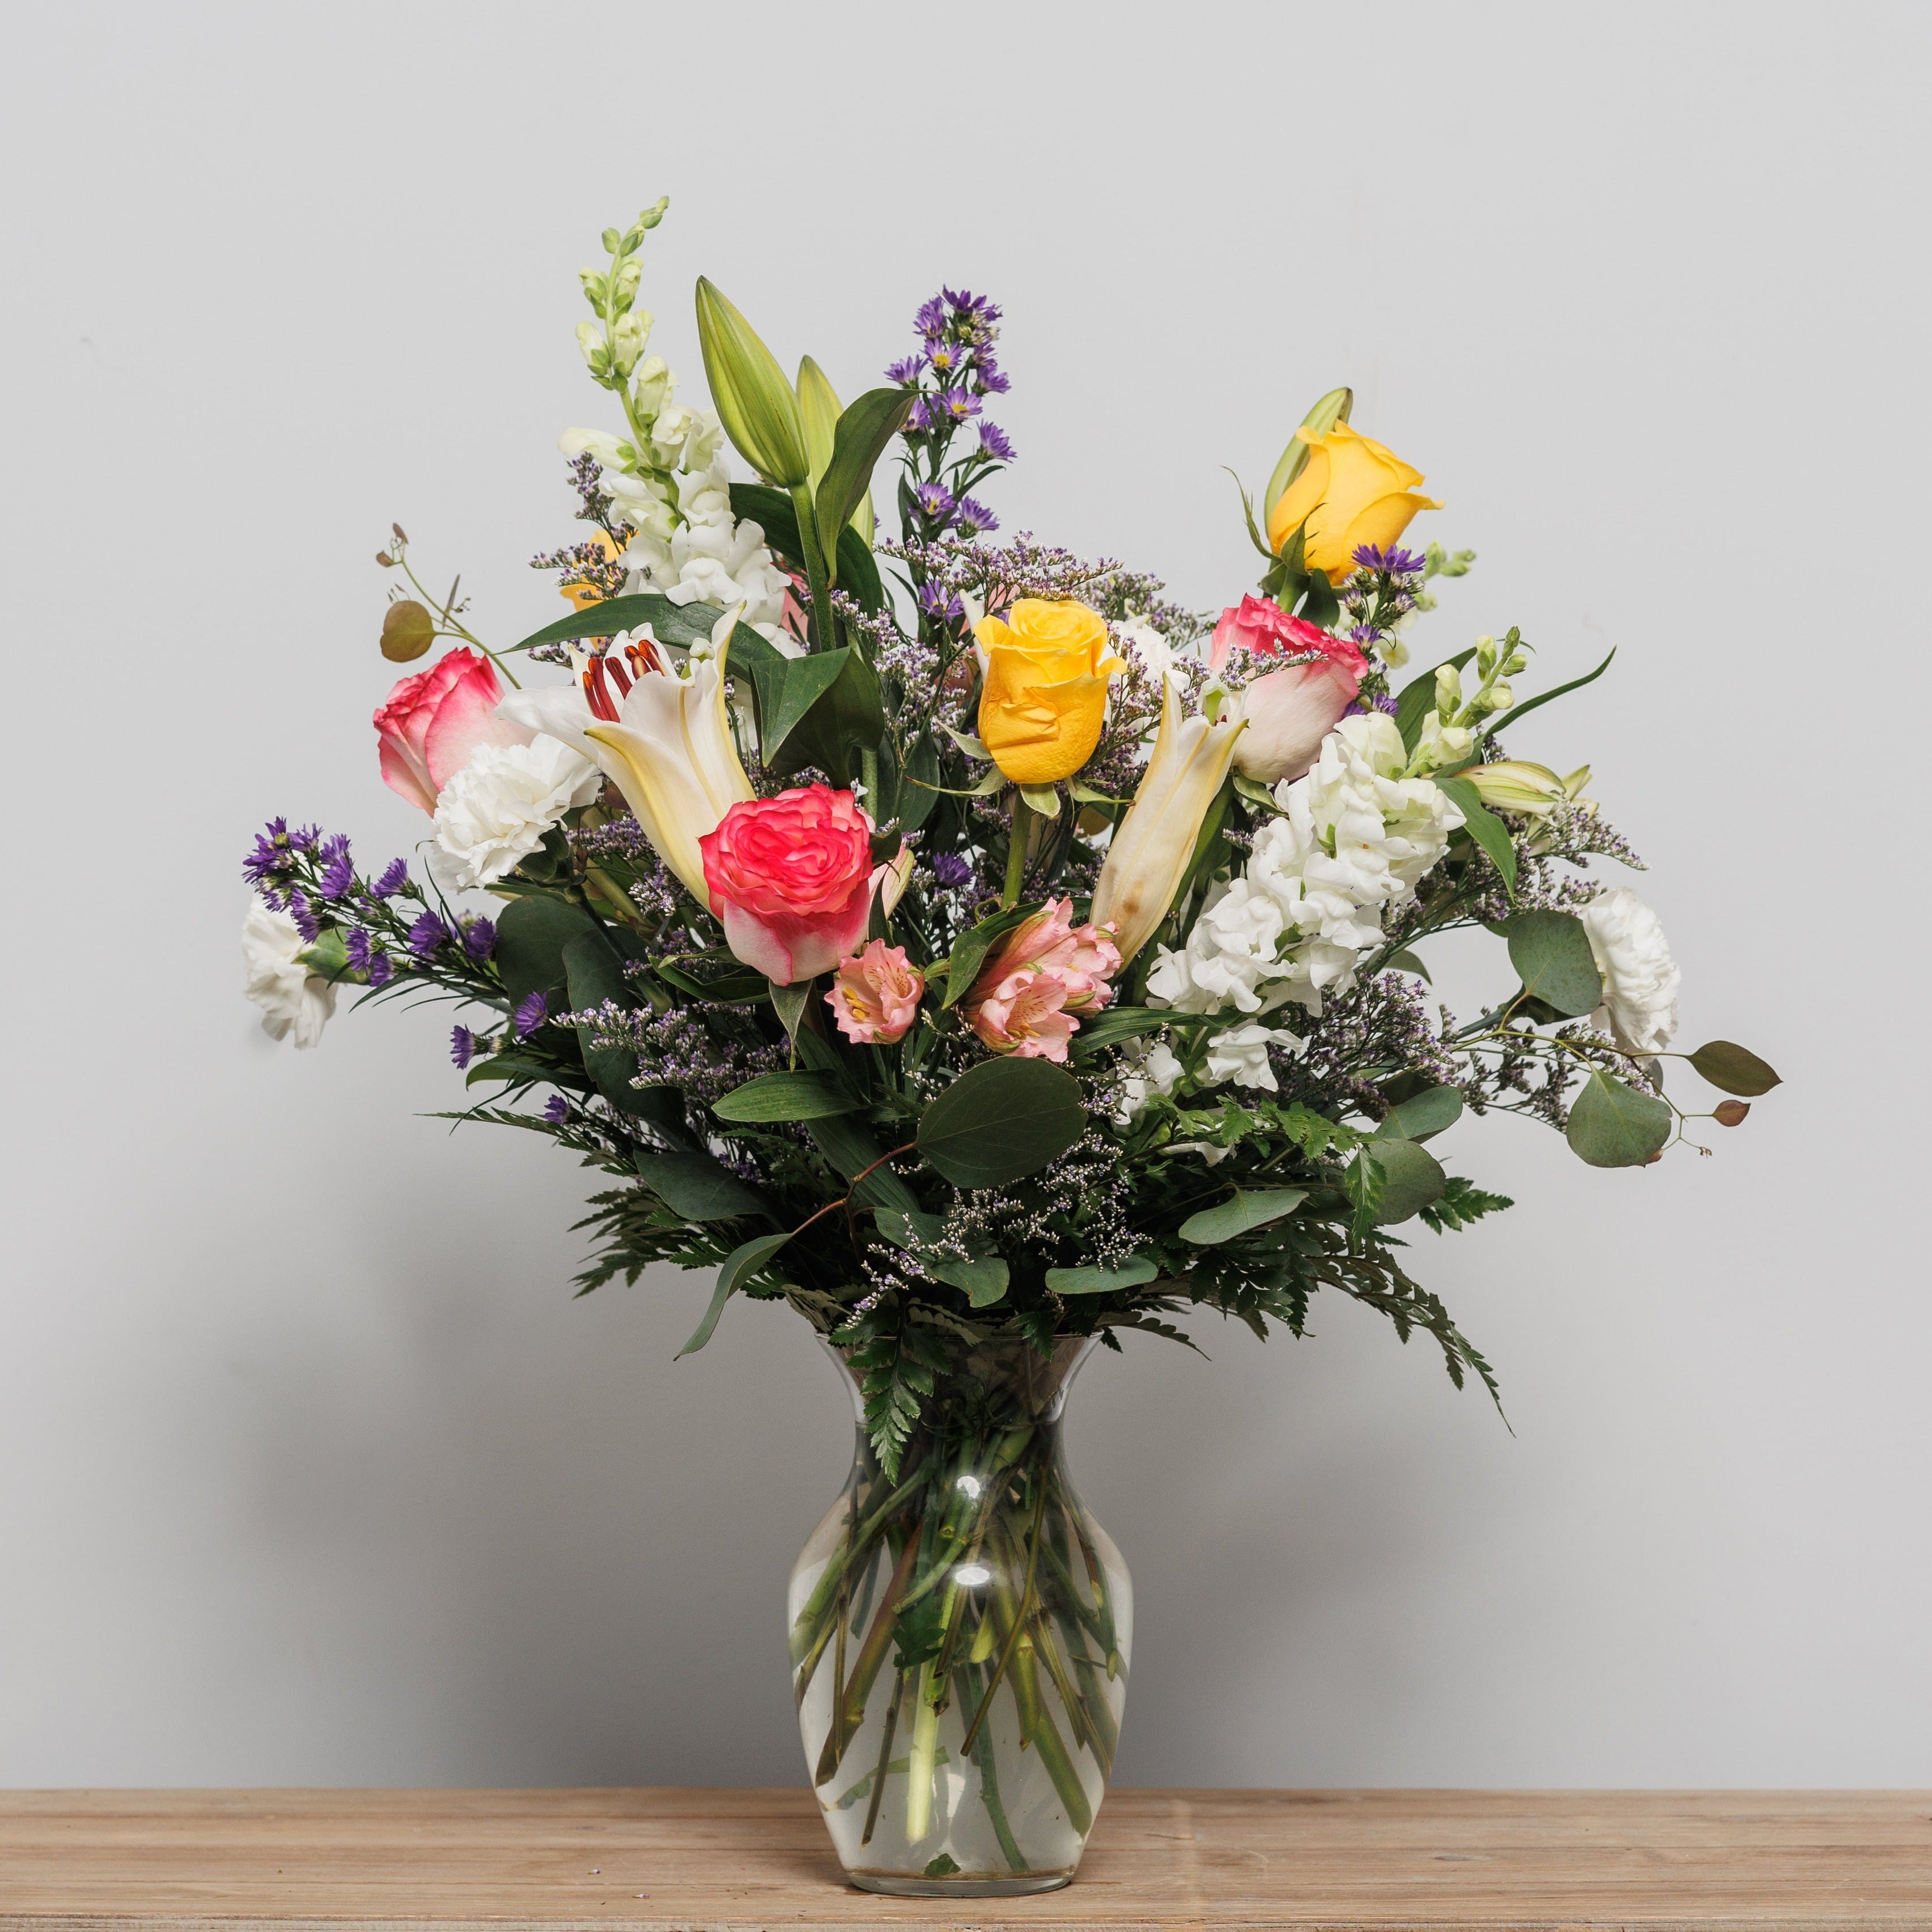 A colorful mix of roses, lilies and snap dragons arranged in a vase.